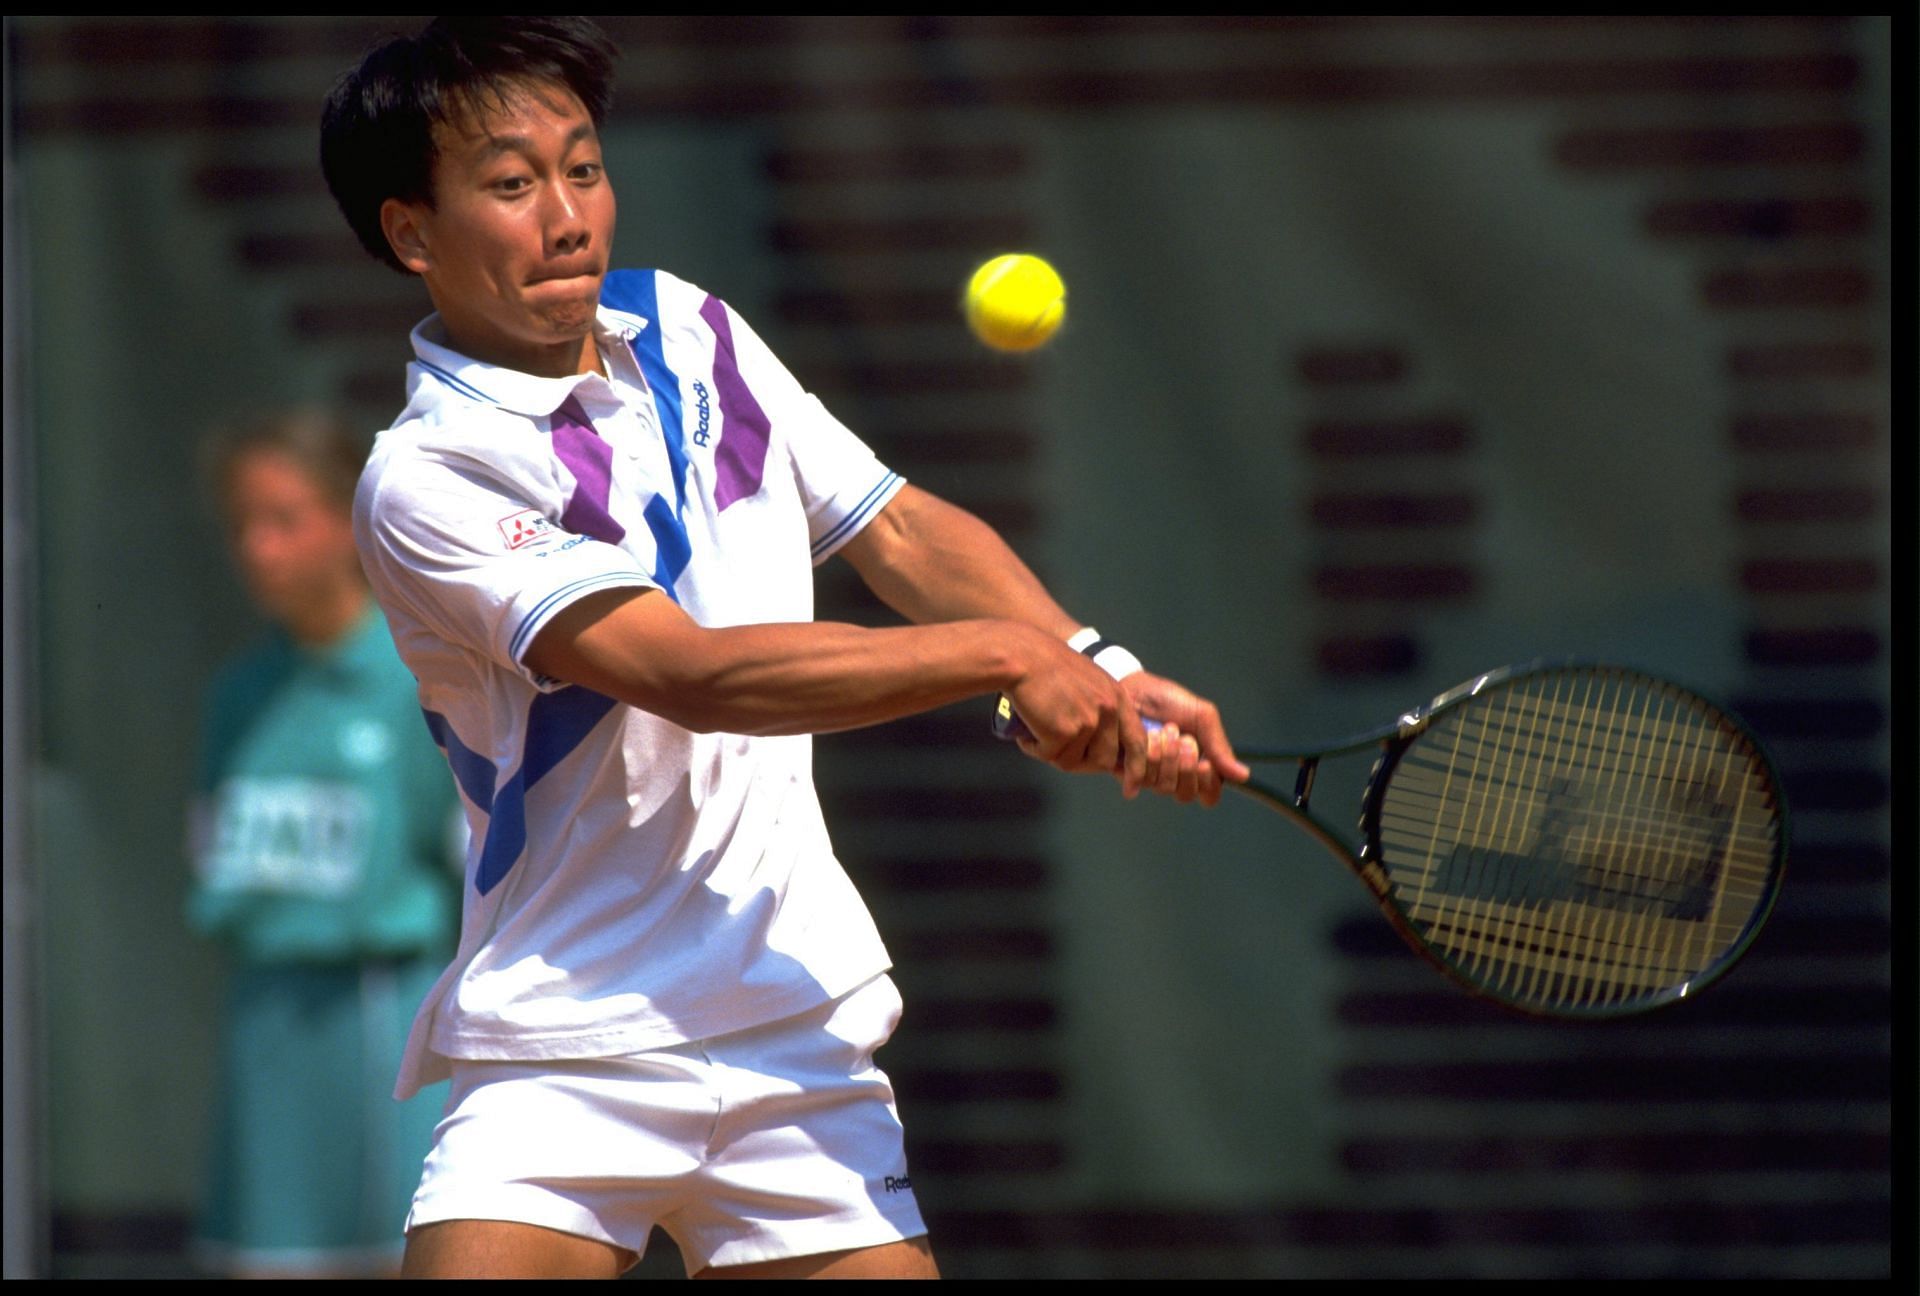 Michael Chang is one of only three 18-year-olds to win a Masters 1000 title